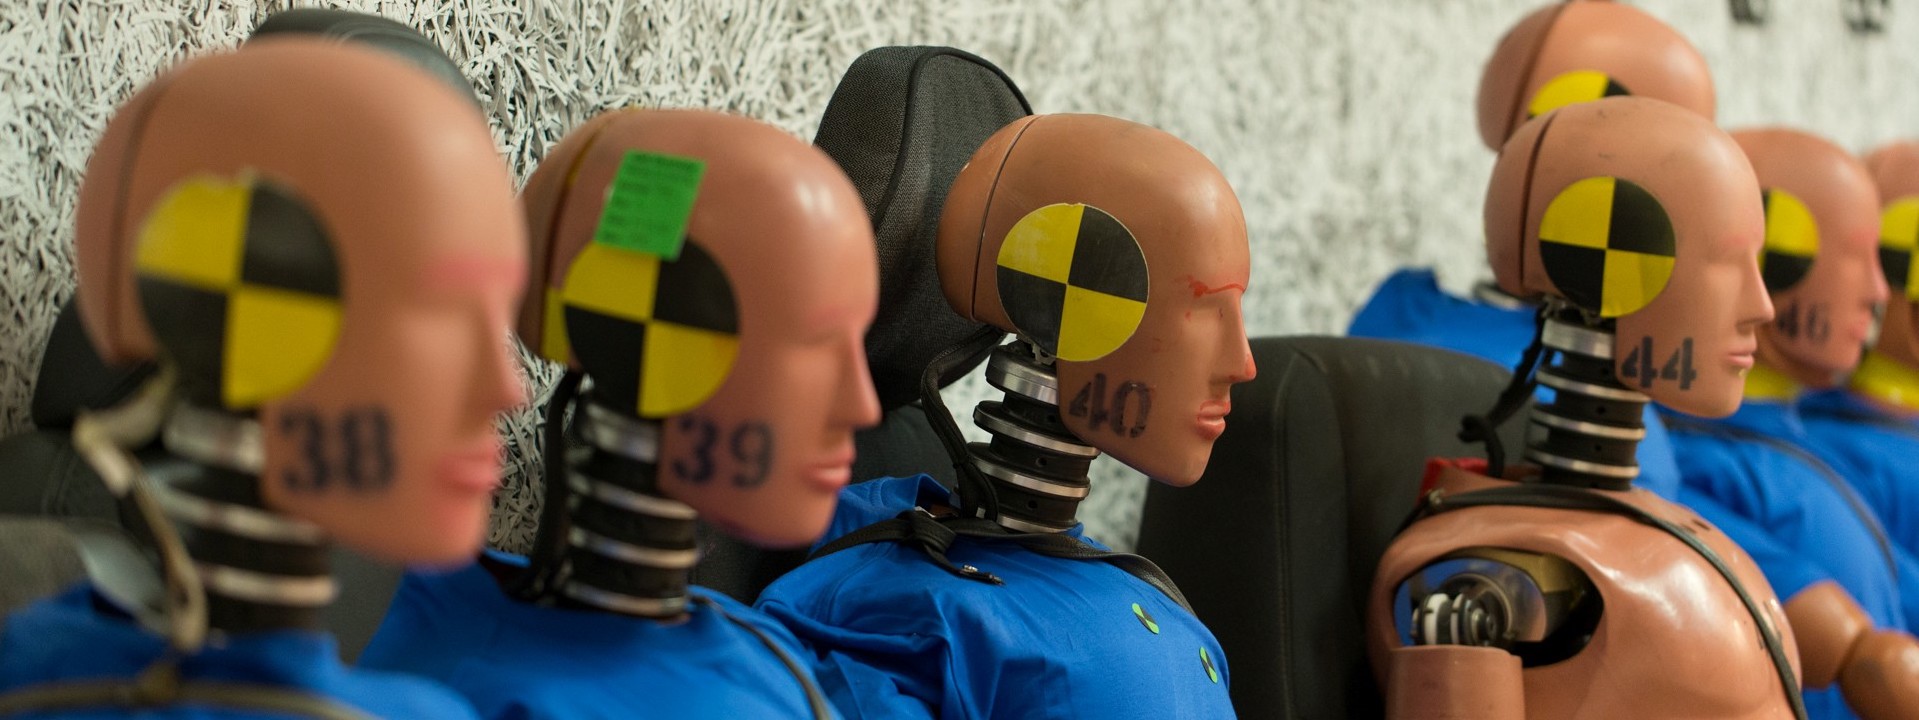 The History Of Crash Test Dummies Your Aaa Network